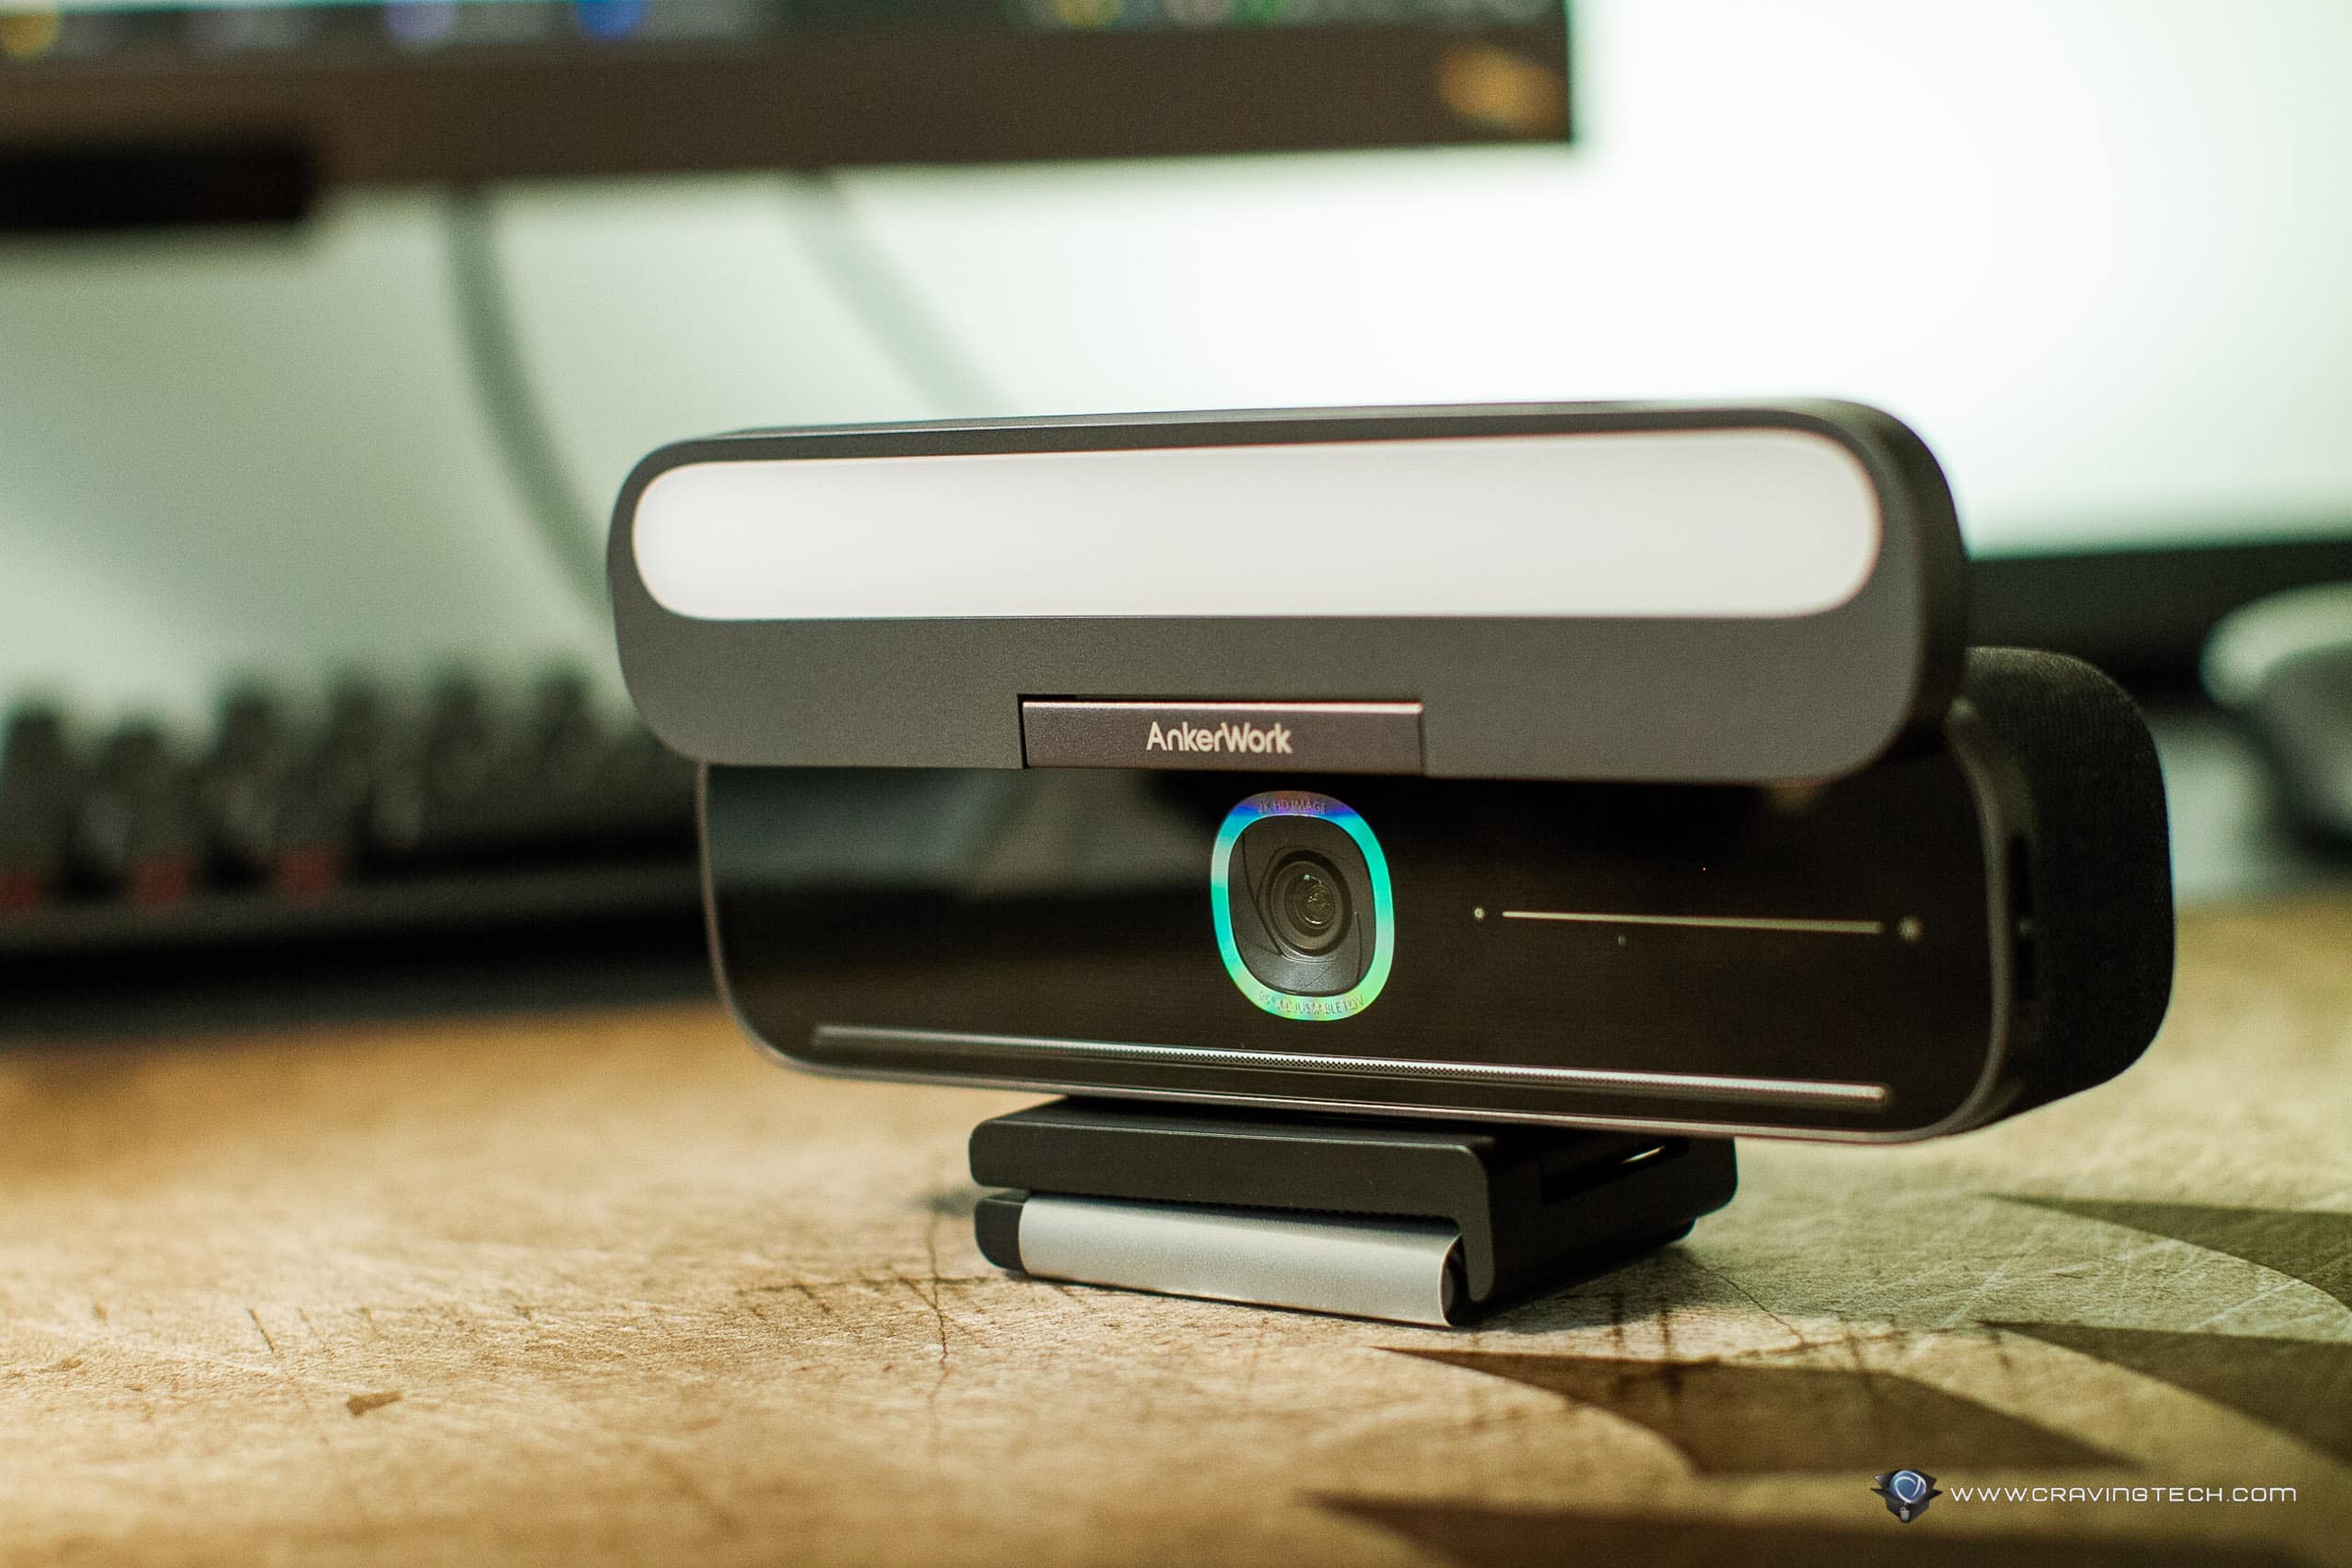 A 2K webcam with built-in lighting and ANC – AnkerWork B600 Video Bar Review